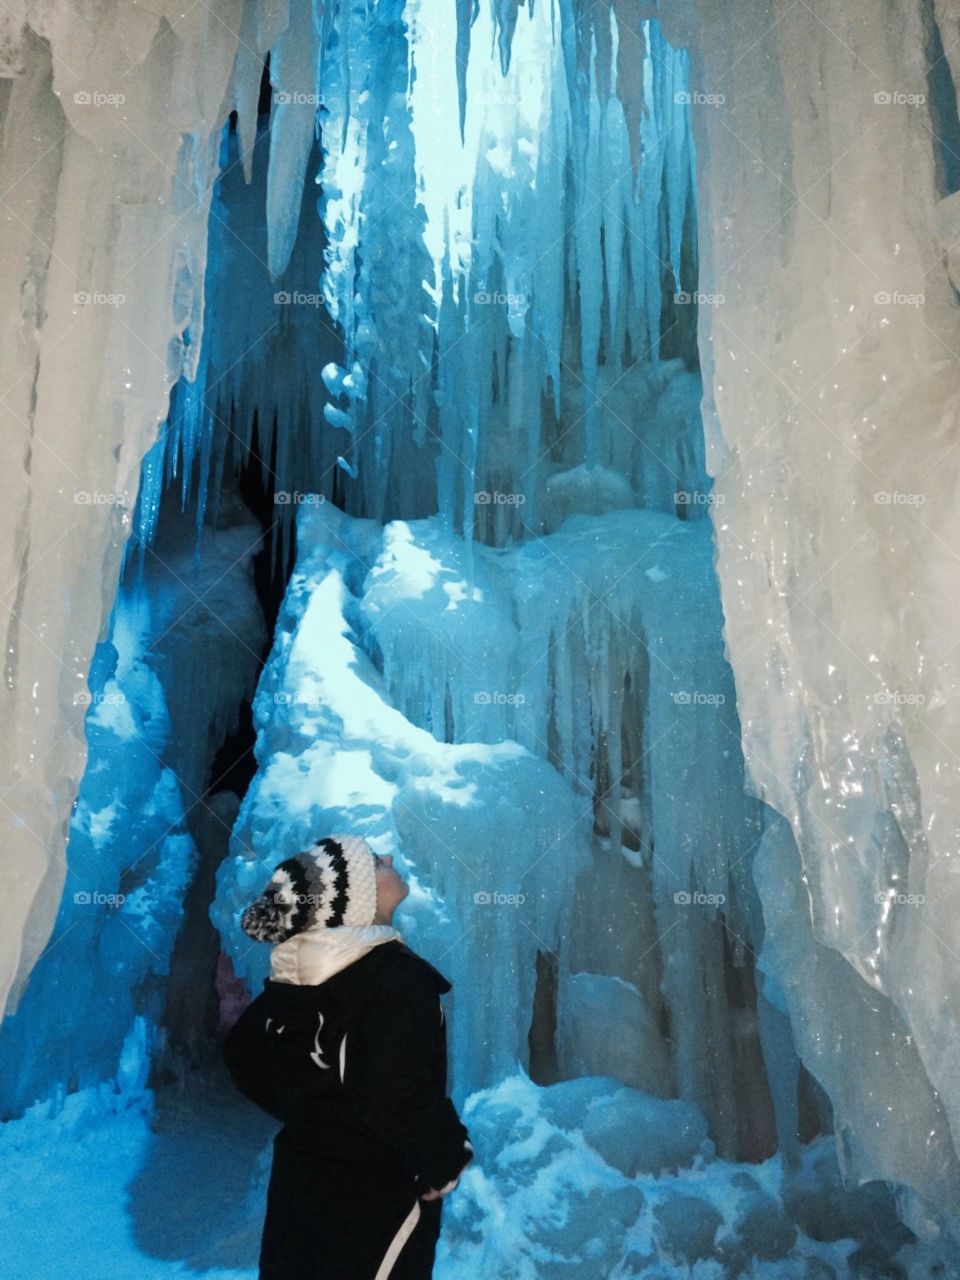 in awe. stratton mountain ice castles